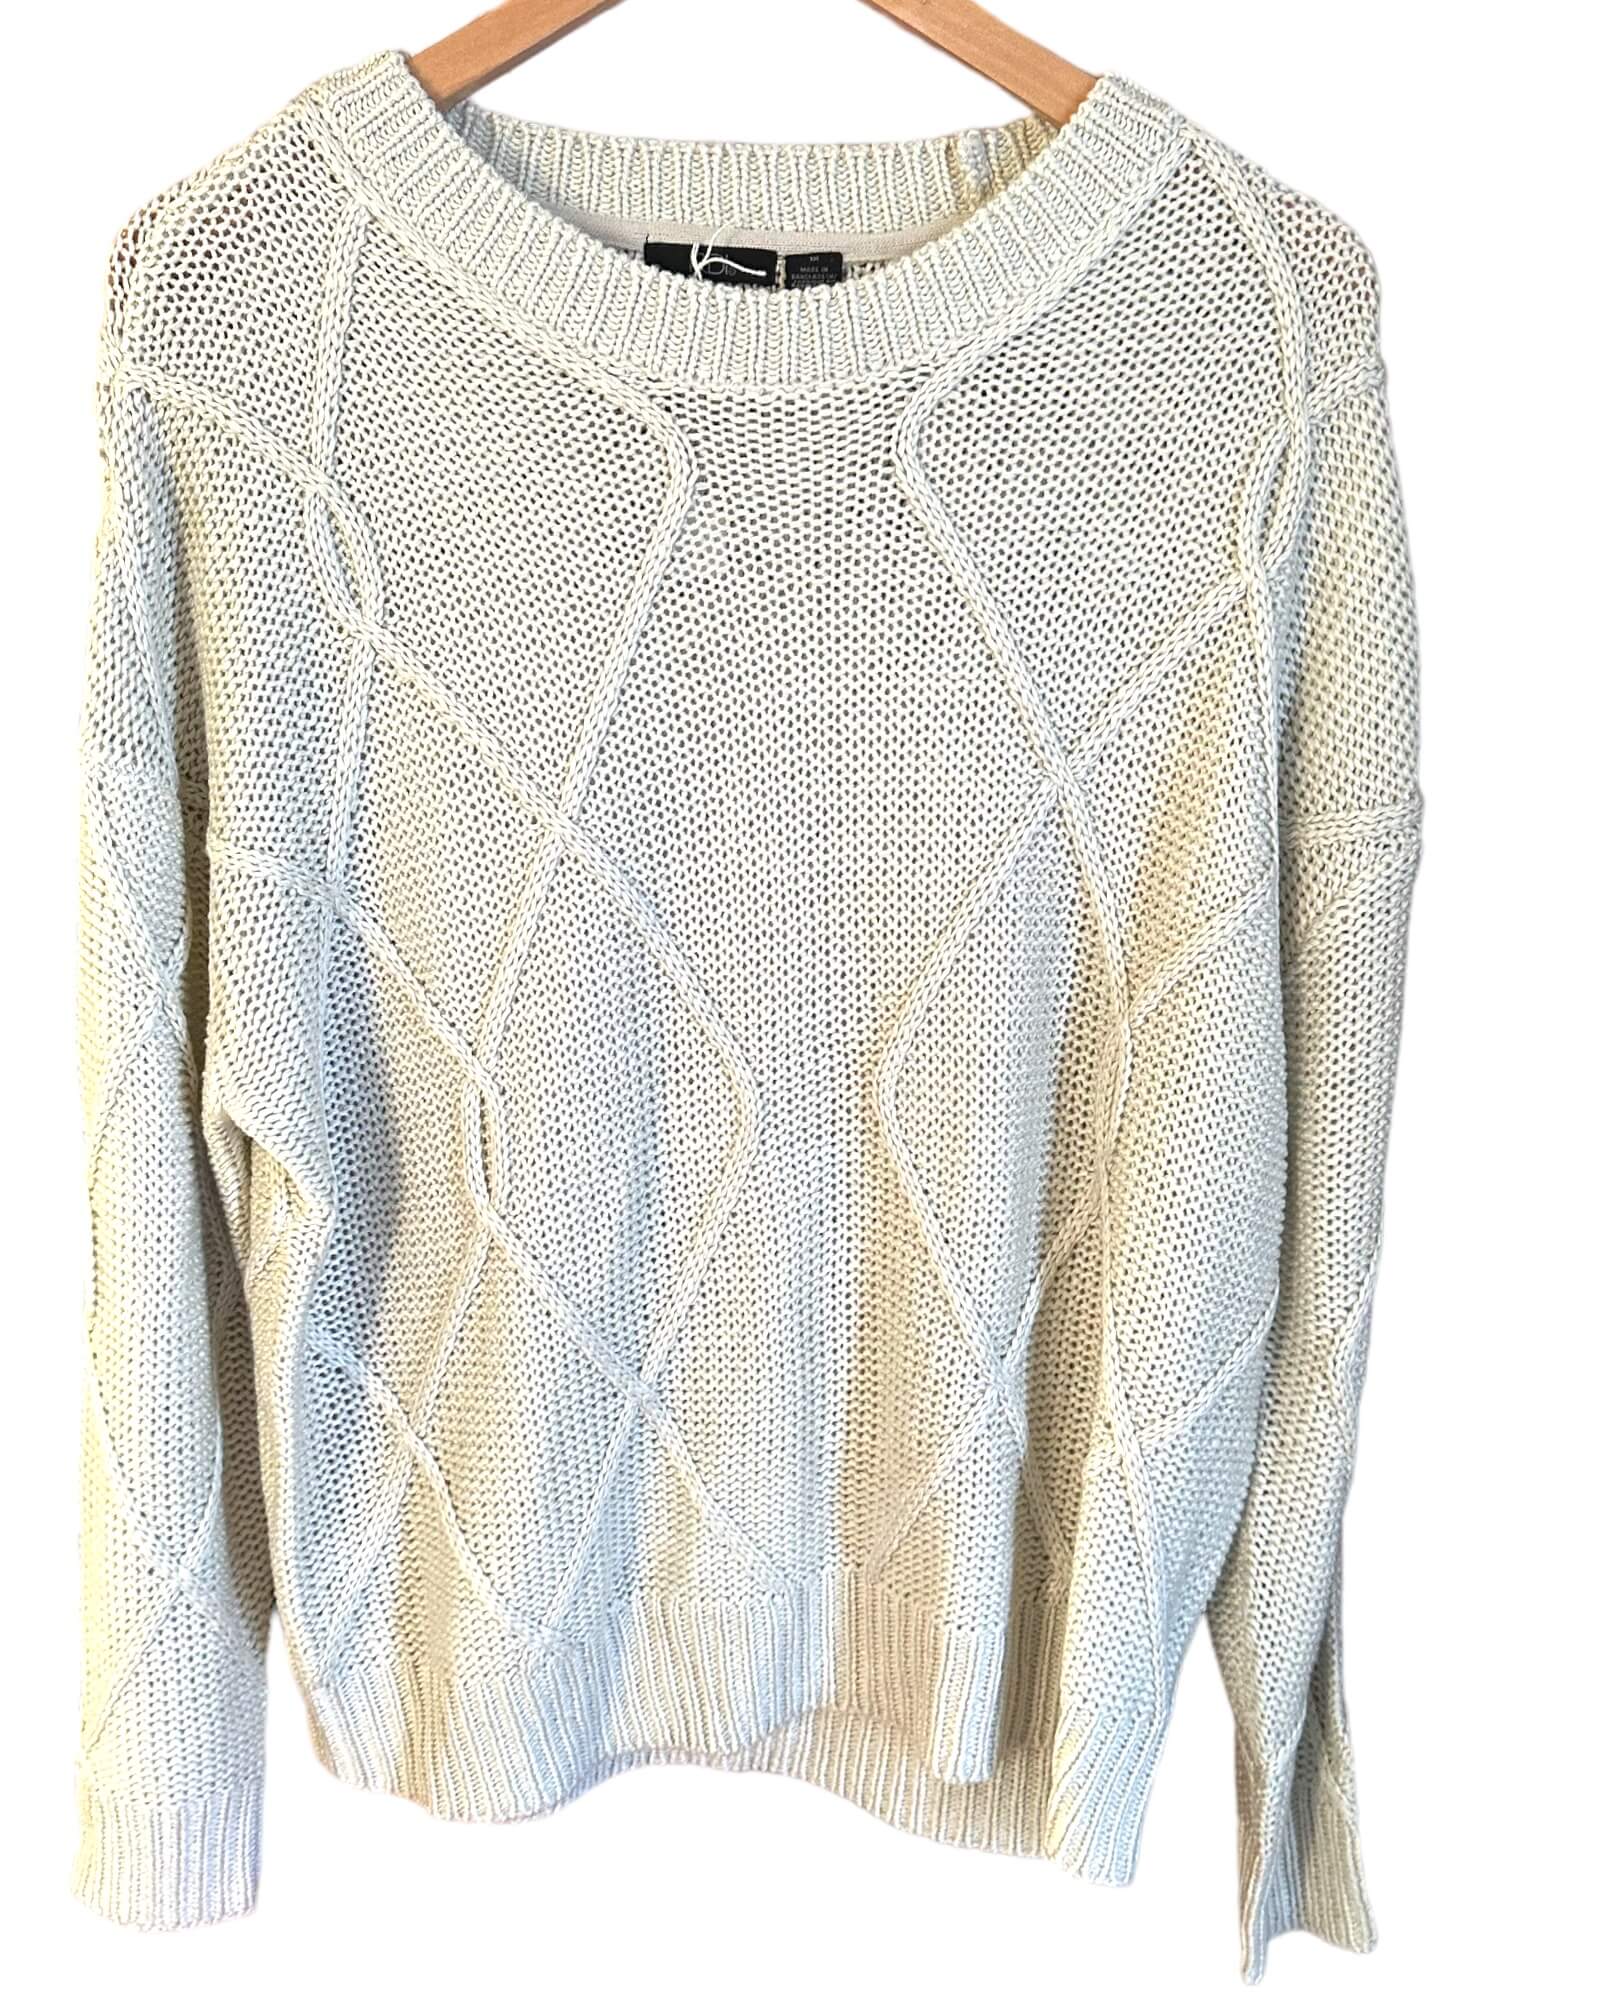 Cool Summer RDI pearl pullover sweater